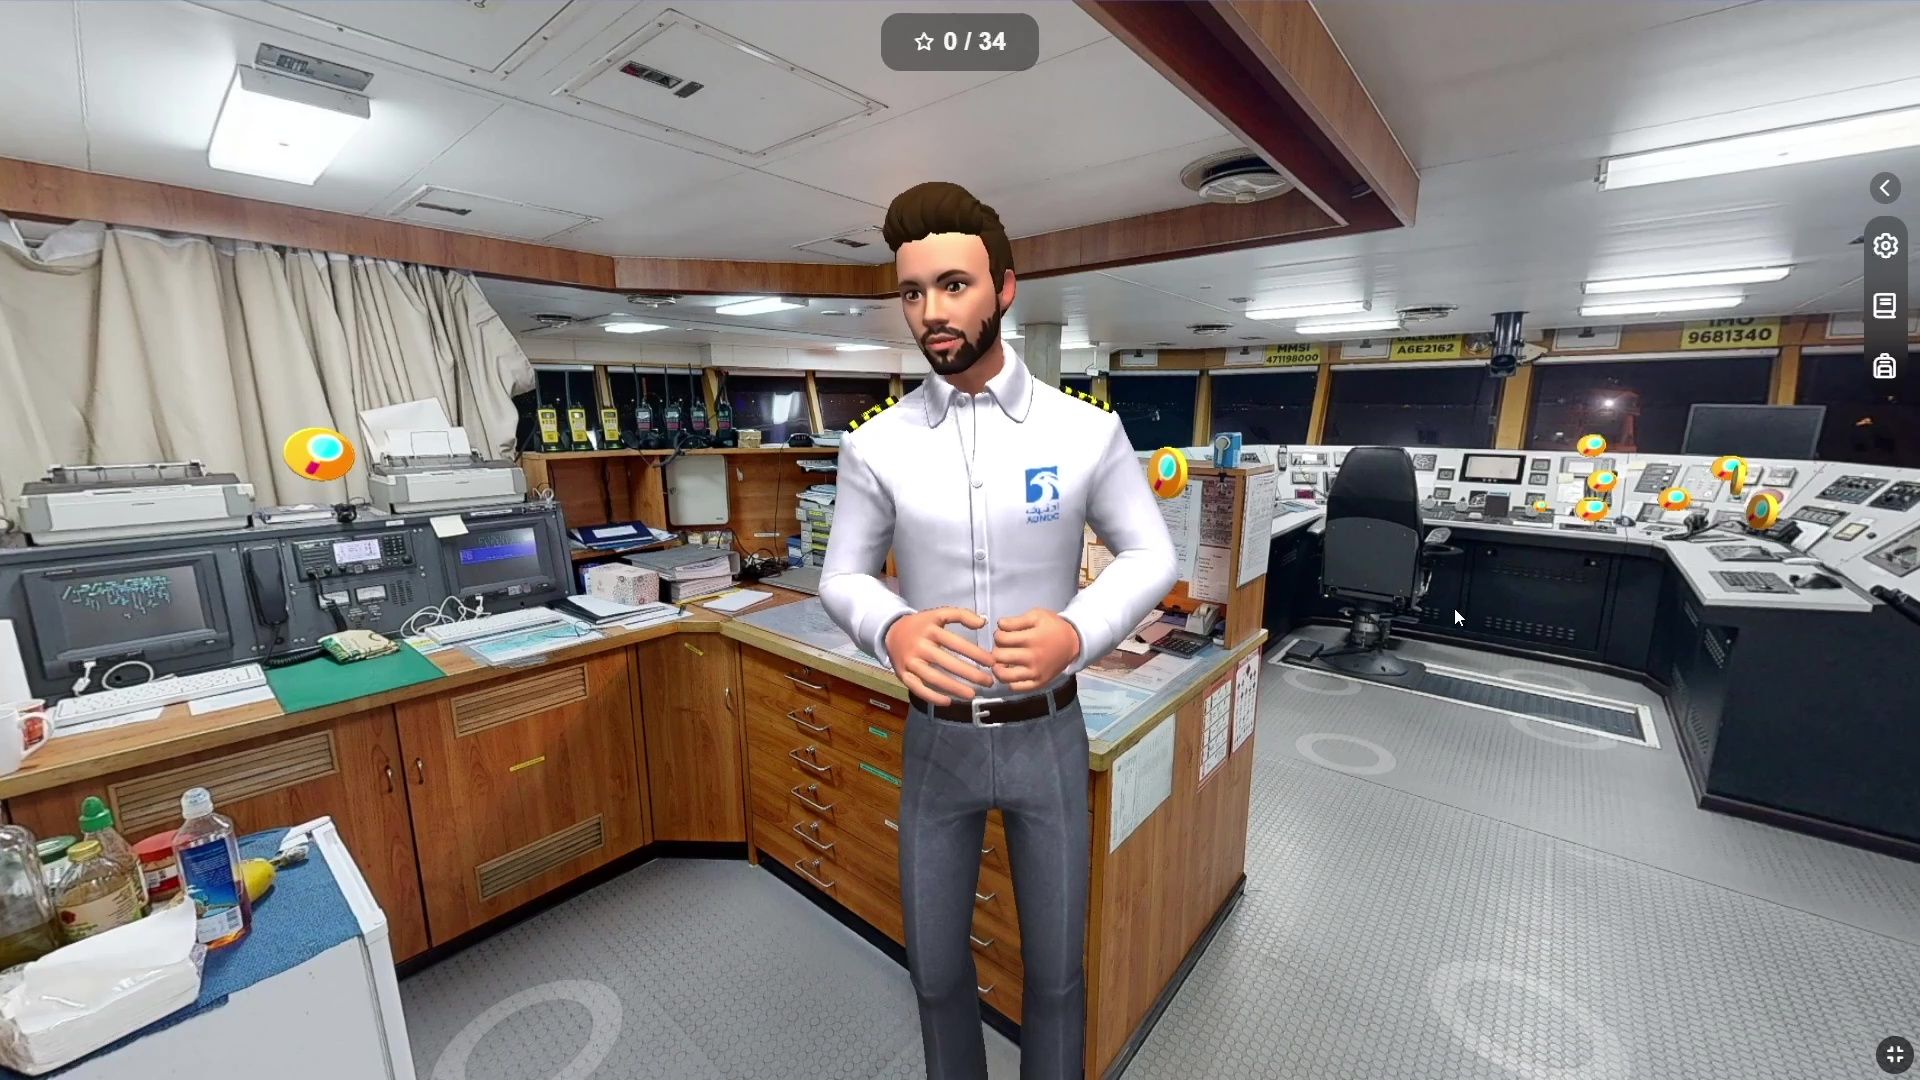 Digital twin technology a virtual captian inviting the users to deck telling the technology